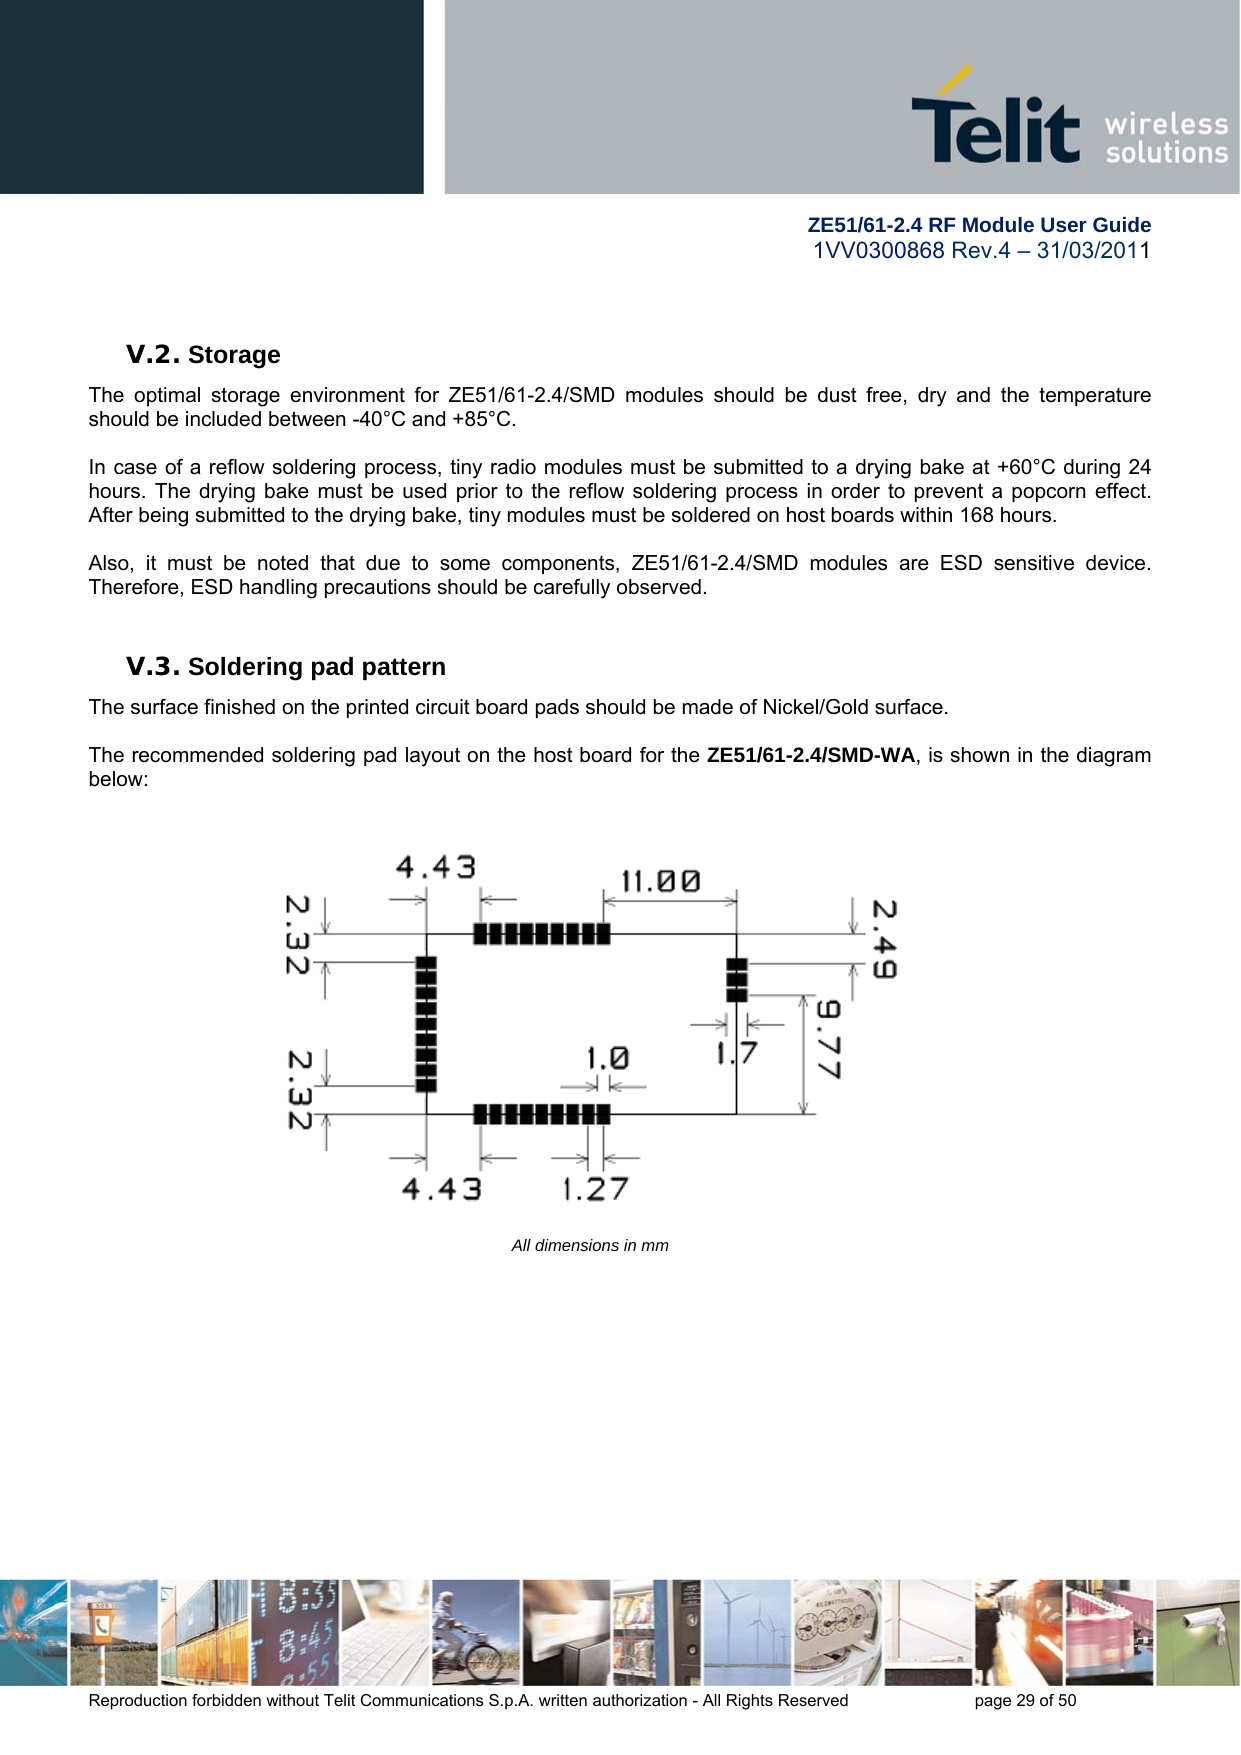        ZE51/61-2.4 RF Module User Guide 1VV0300868 Rev.4 – 31/03/2011 Reproduction forbidden without Telit Communications S.p.A. written authorization - All Rights Reserved    page 29 of 50   V.2. Storage The optimal storage environment for ZE51/61-2.4/SMD modules should be dust free, dry and the temperature should be included between -40°C and +85°C.  In case of a reflow soldering process, tiny radio modules must be submitted to a drying bake at +60°C during 24 hours. The drying bake must be used prior to the reflow soldering process in order to prevent a popcorn effect. After being submitted to the drying bake, tiny modules must be soldered on host boards within 168 hours.   Also, it must be noted that due to some components, ZE51/61-2.4/SMD modules are ESD sensitive device. Therefore, ESD handling precautions should be carefully observed.  V.3. Soldering pad pattern The surface finished on the printed circuit board pads should be made of Nickel/Gold surface.   The recommended soldering pad layout on the host board for the ZE51/61-2.4/SMD-WA, is shown in the diagram below:     All dimensions in mm              